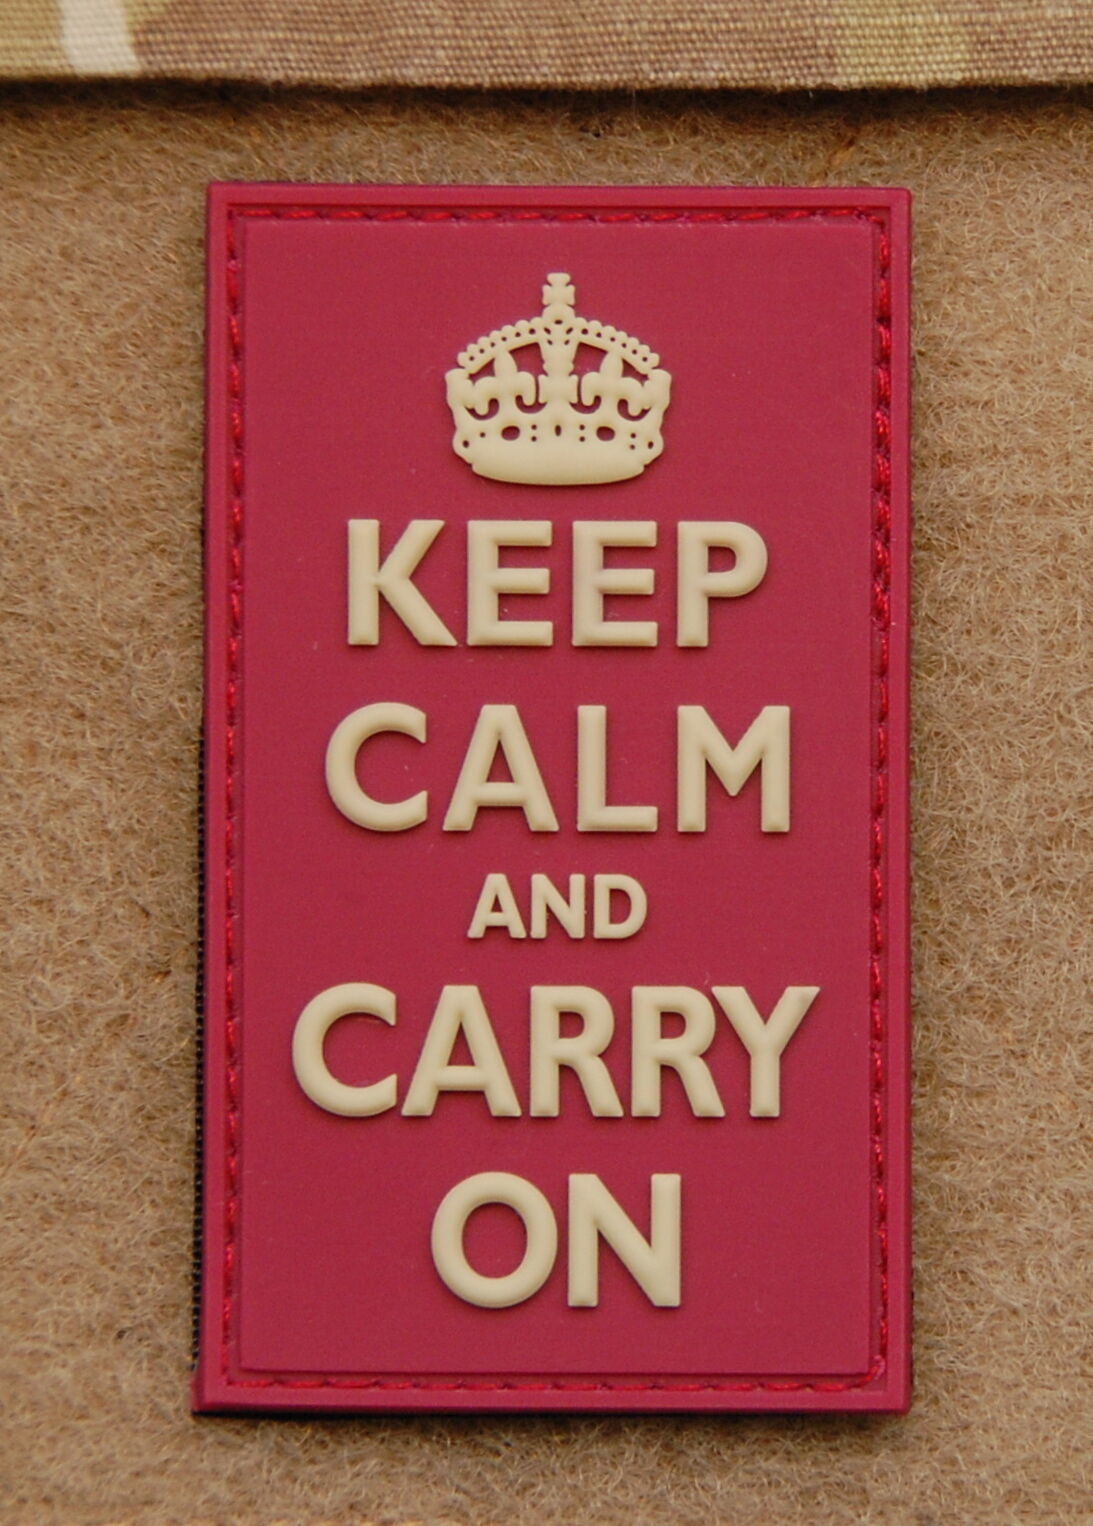 3D PVC KEEP CALM AND CARRY ON Patch Navy SEAL Afghanistan UKSF British Army  - £6.23 GBP